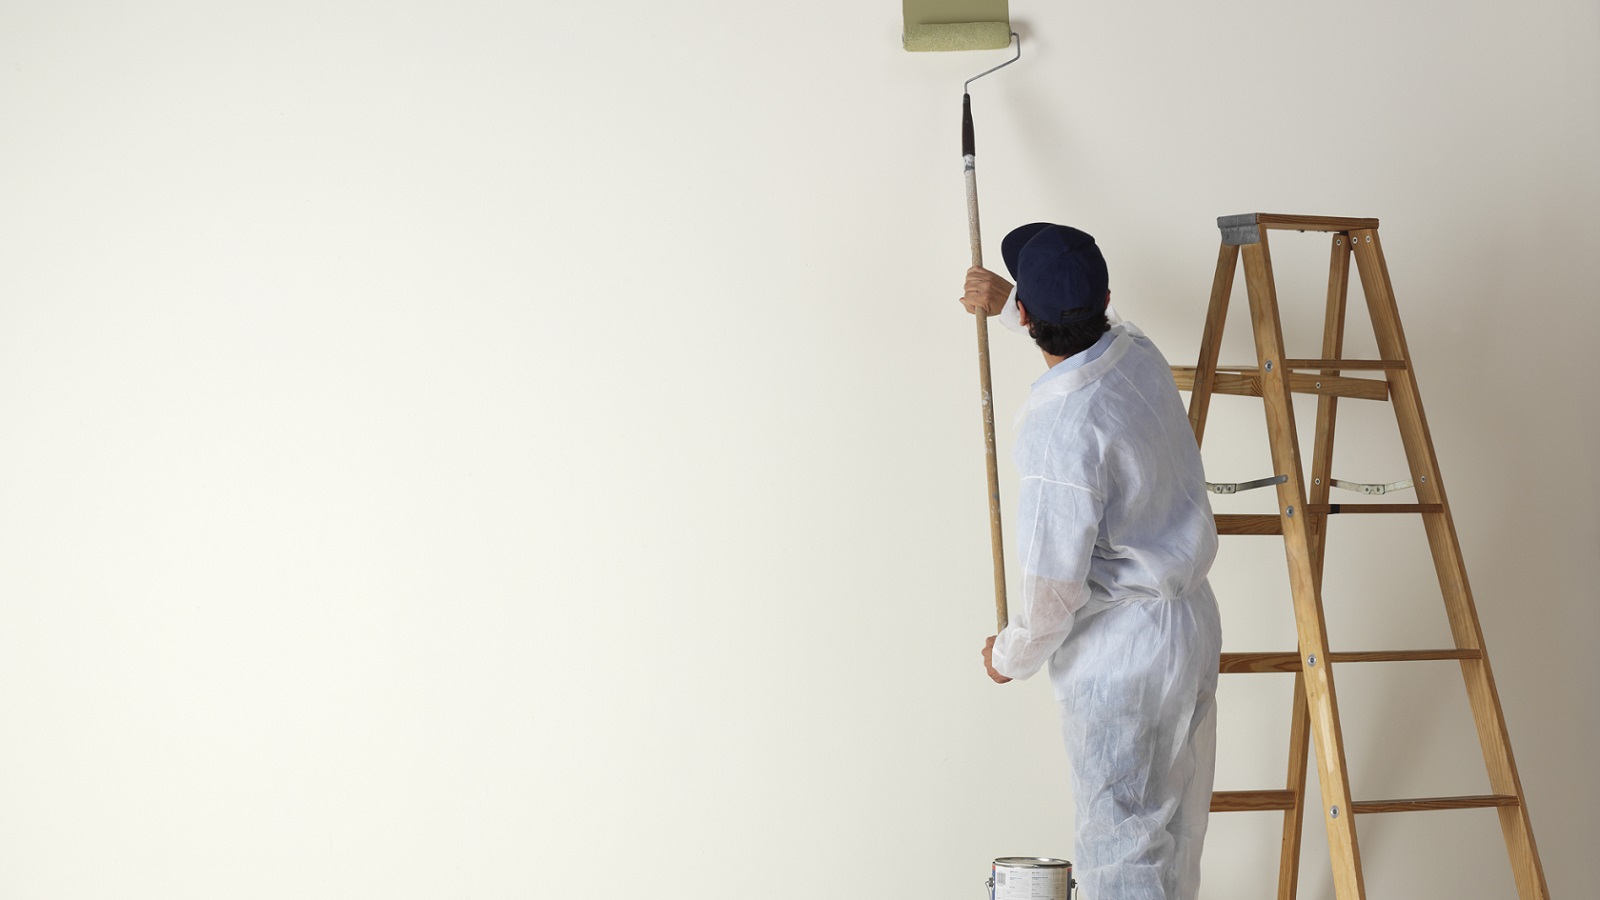 Painters and Decorators within West Kensington | Decorating Service